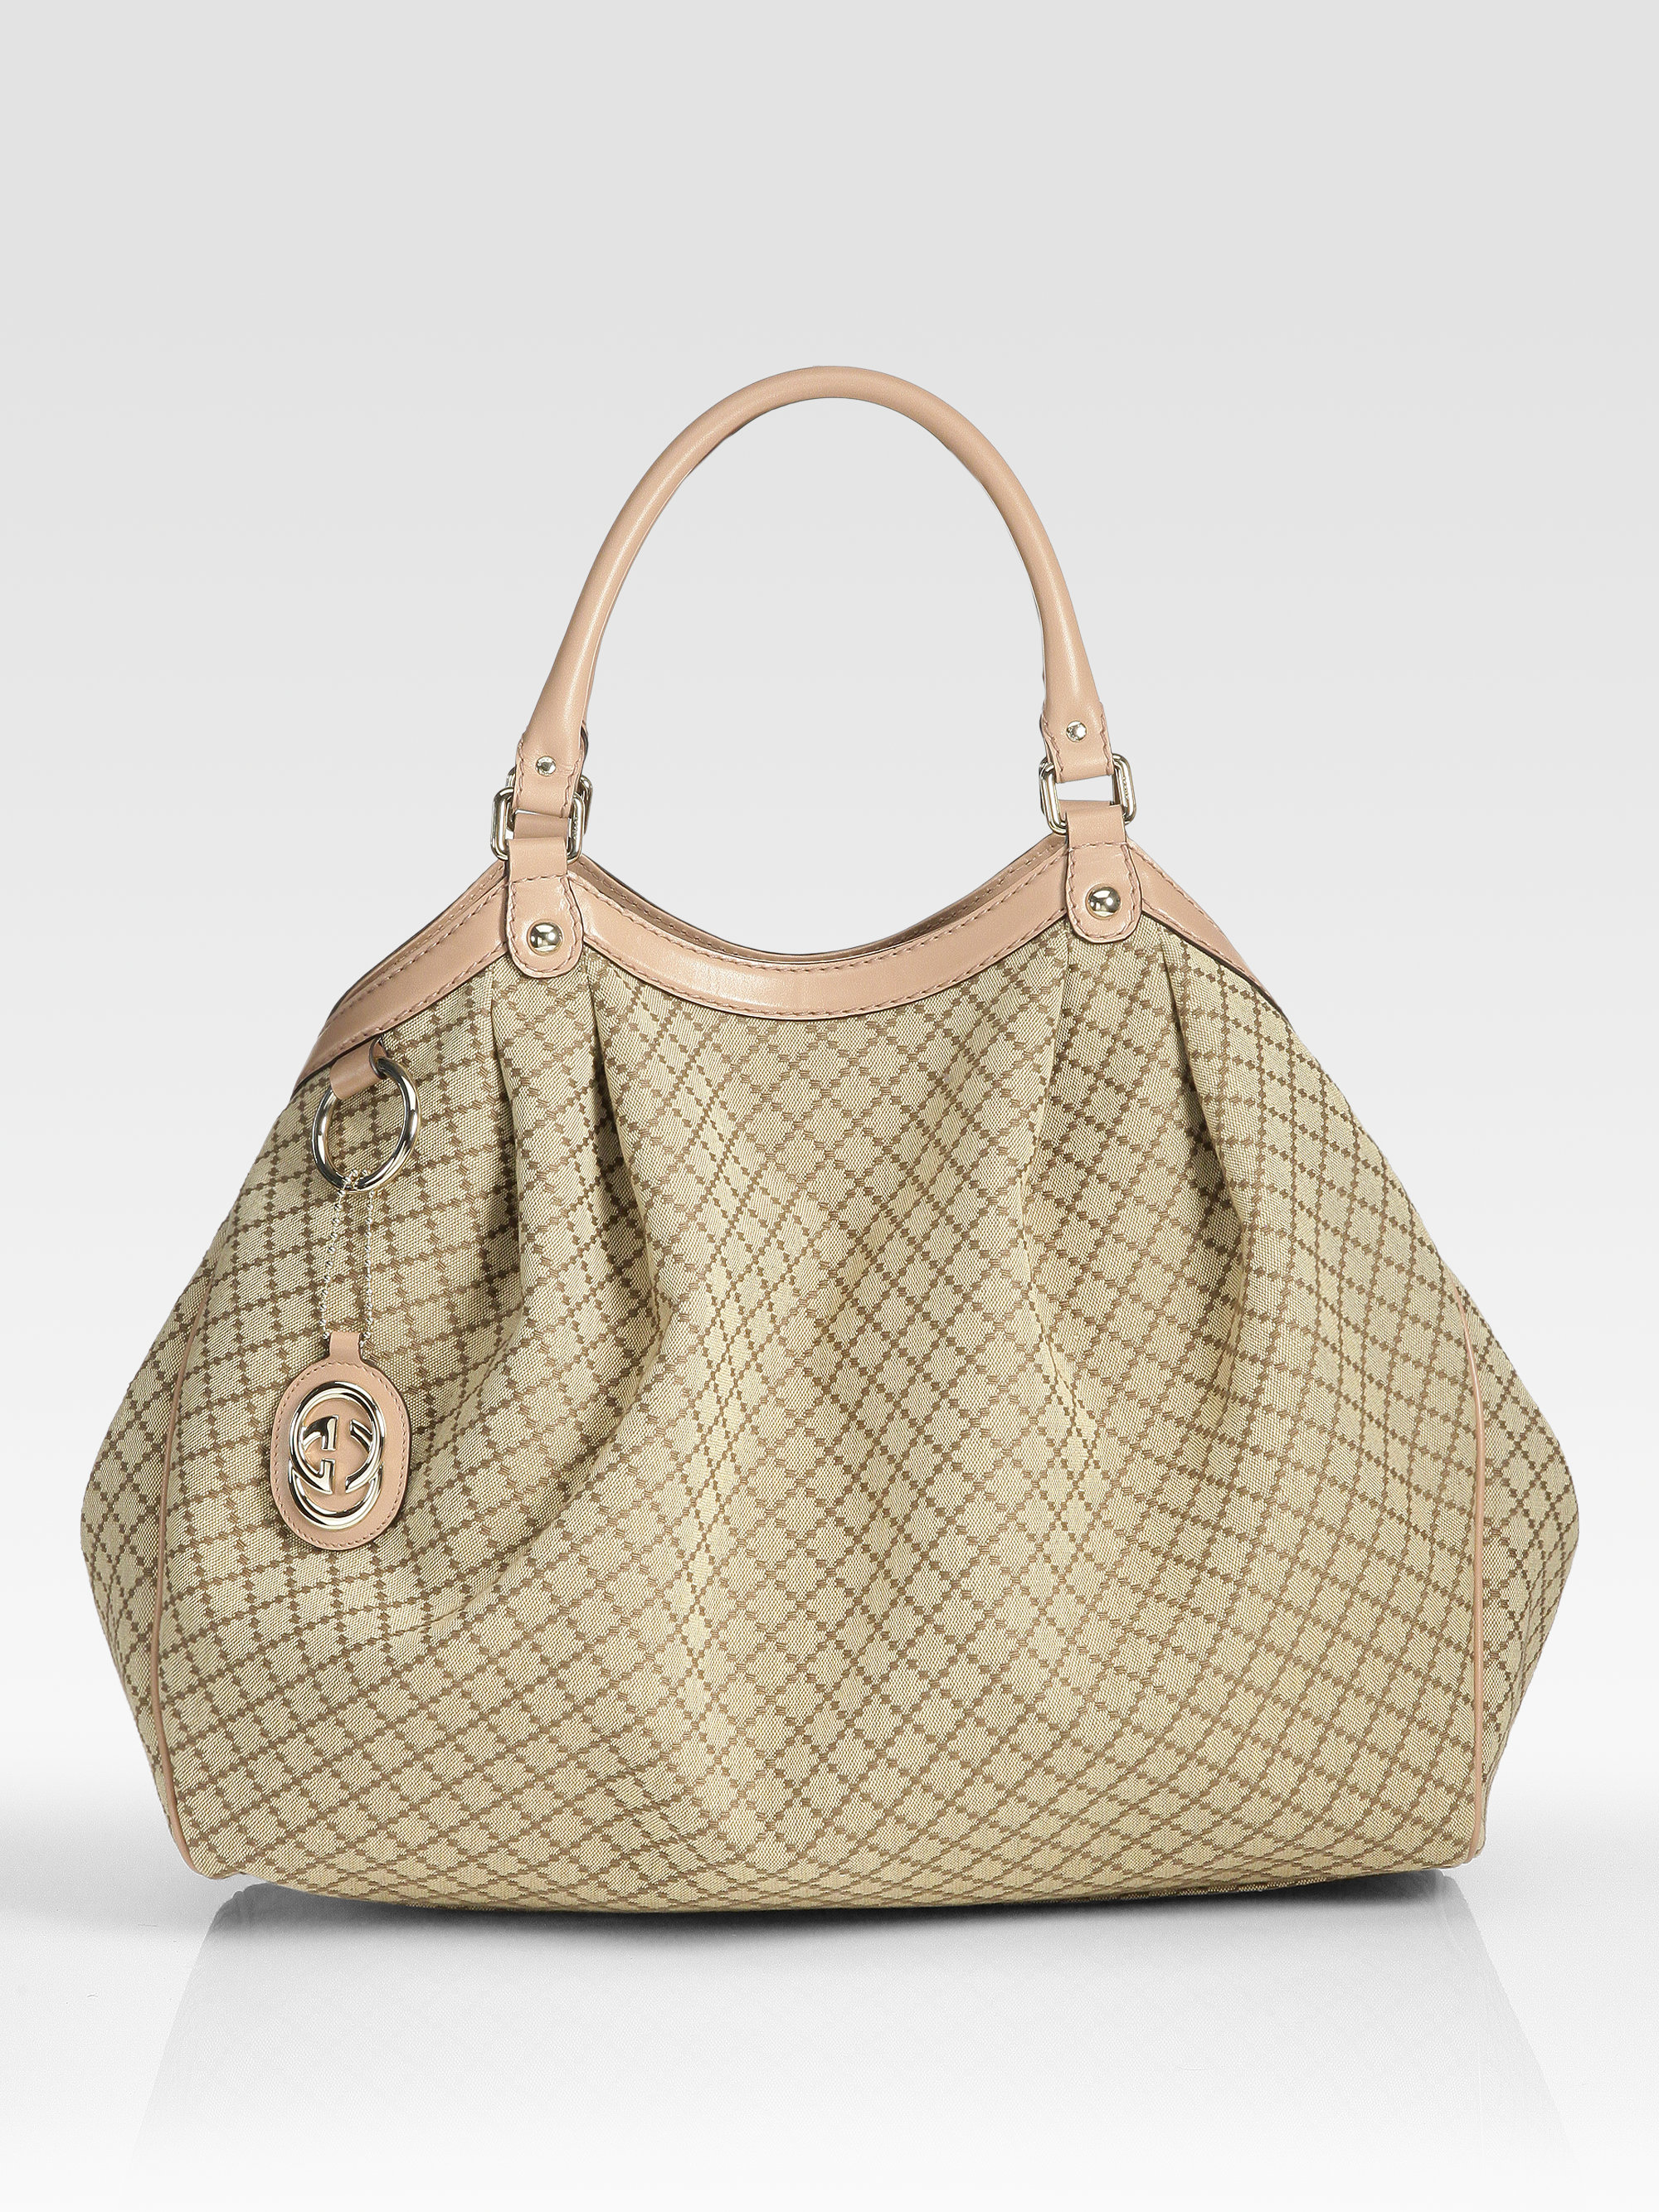 Gucci Sukey Large Tote Bag in Beige | Lyst